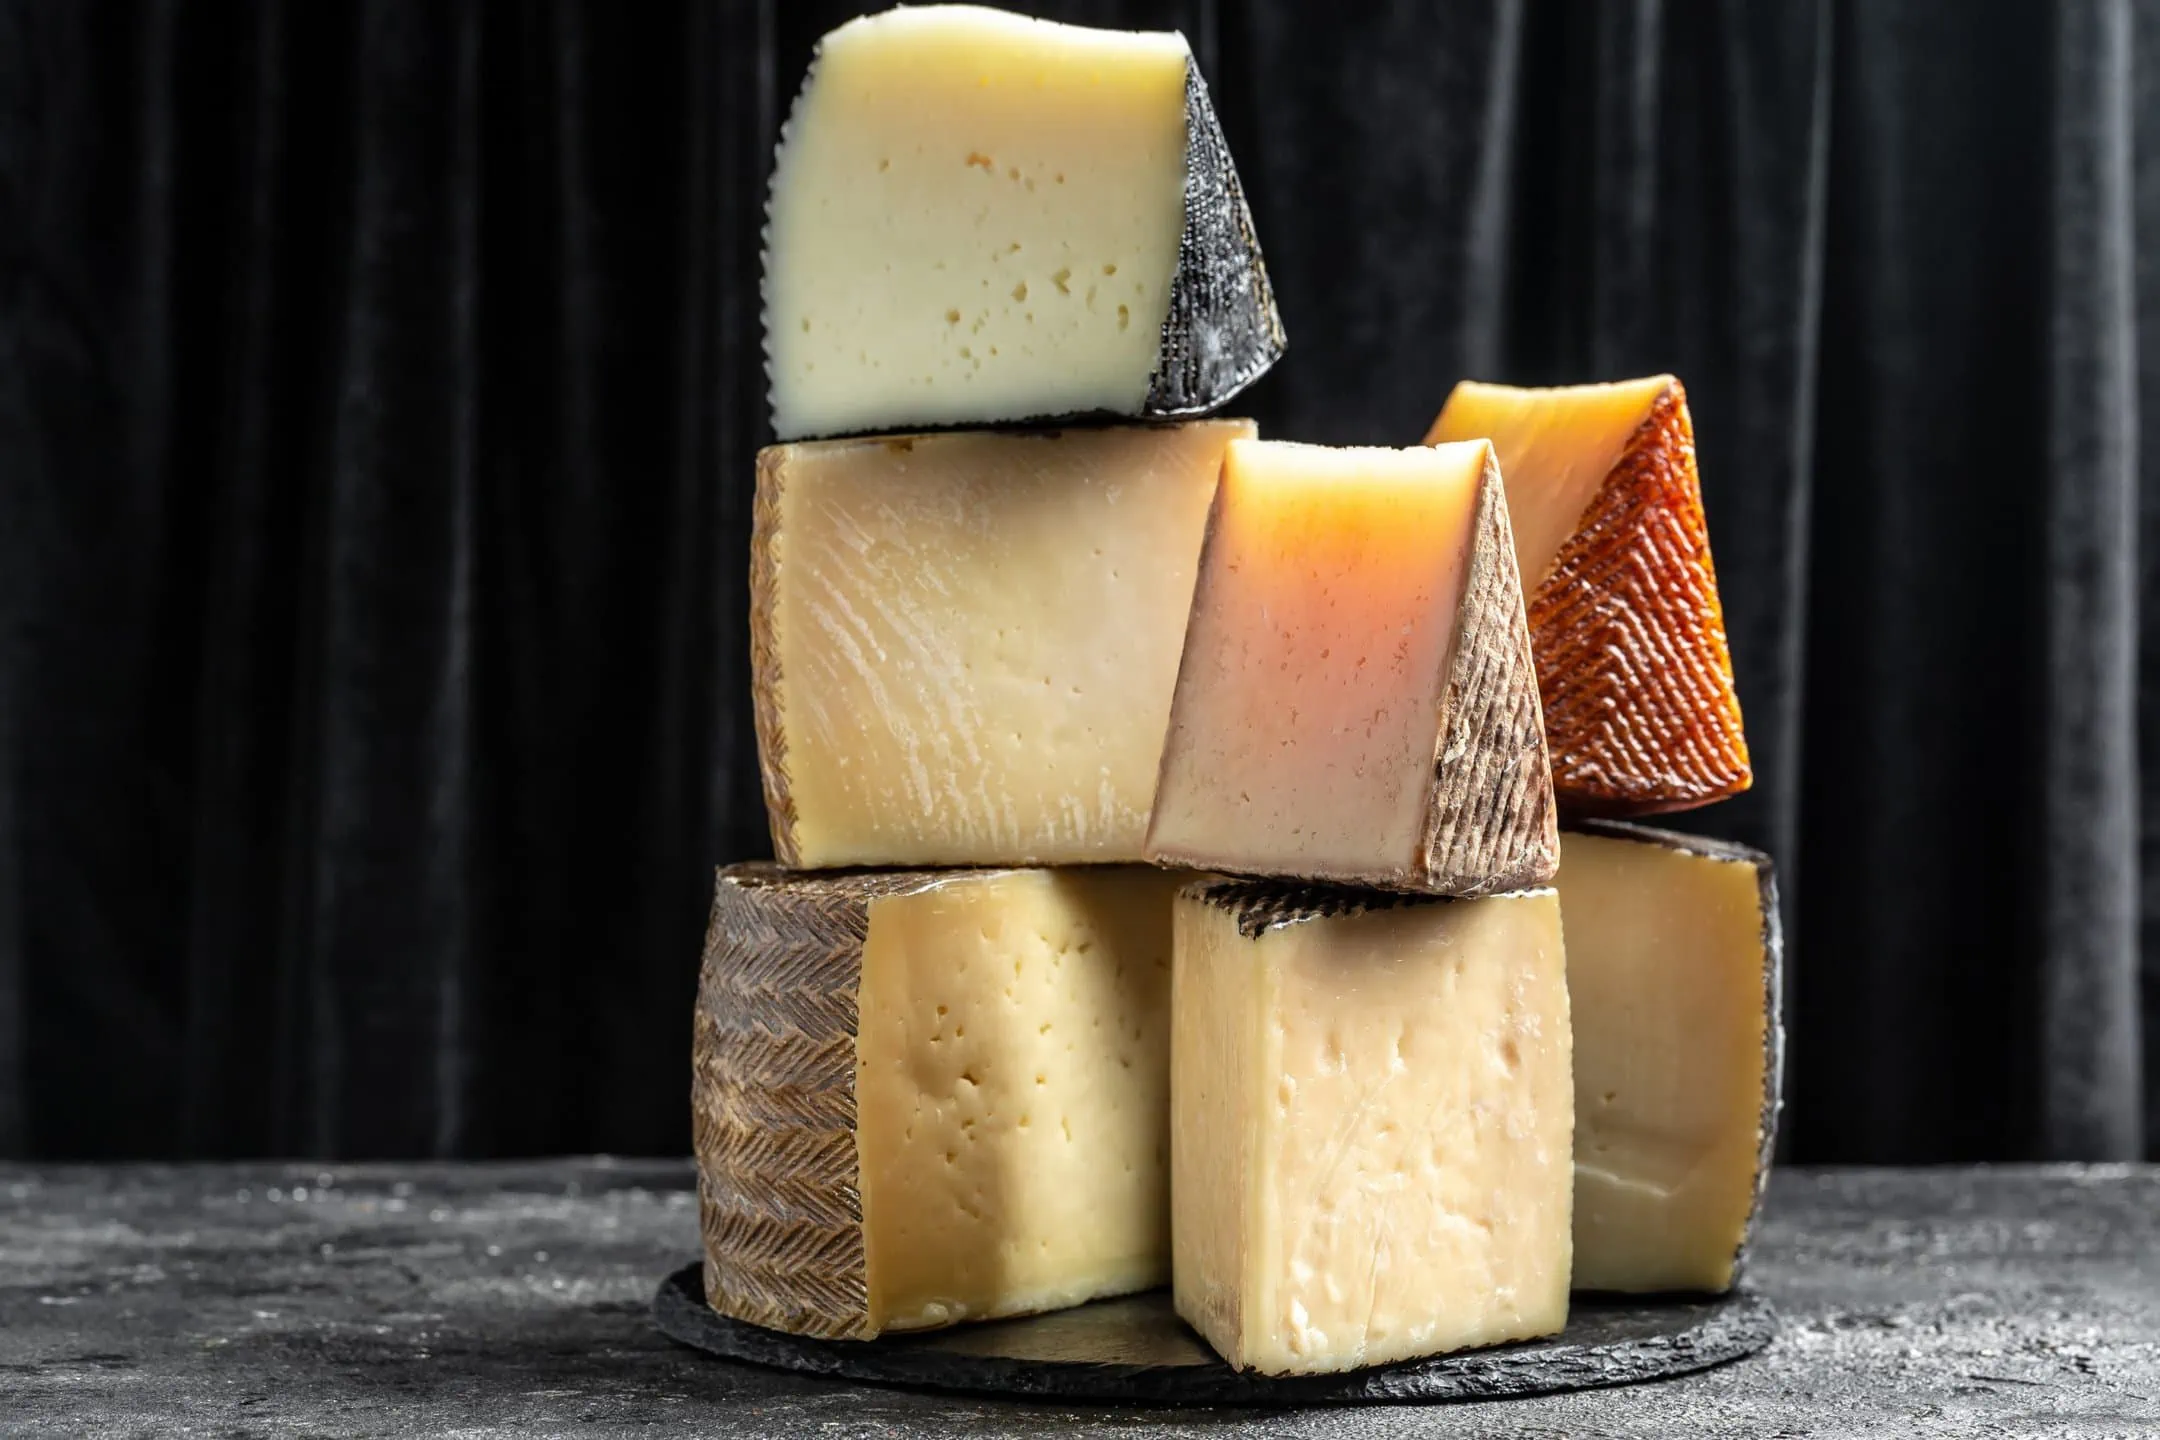 Various types of Spanish manchego cheese made from cow and goat milk.